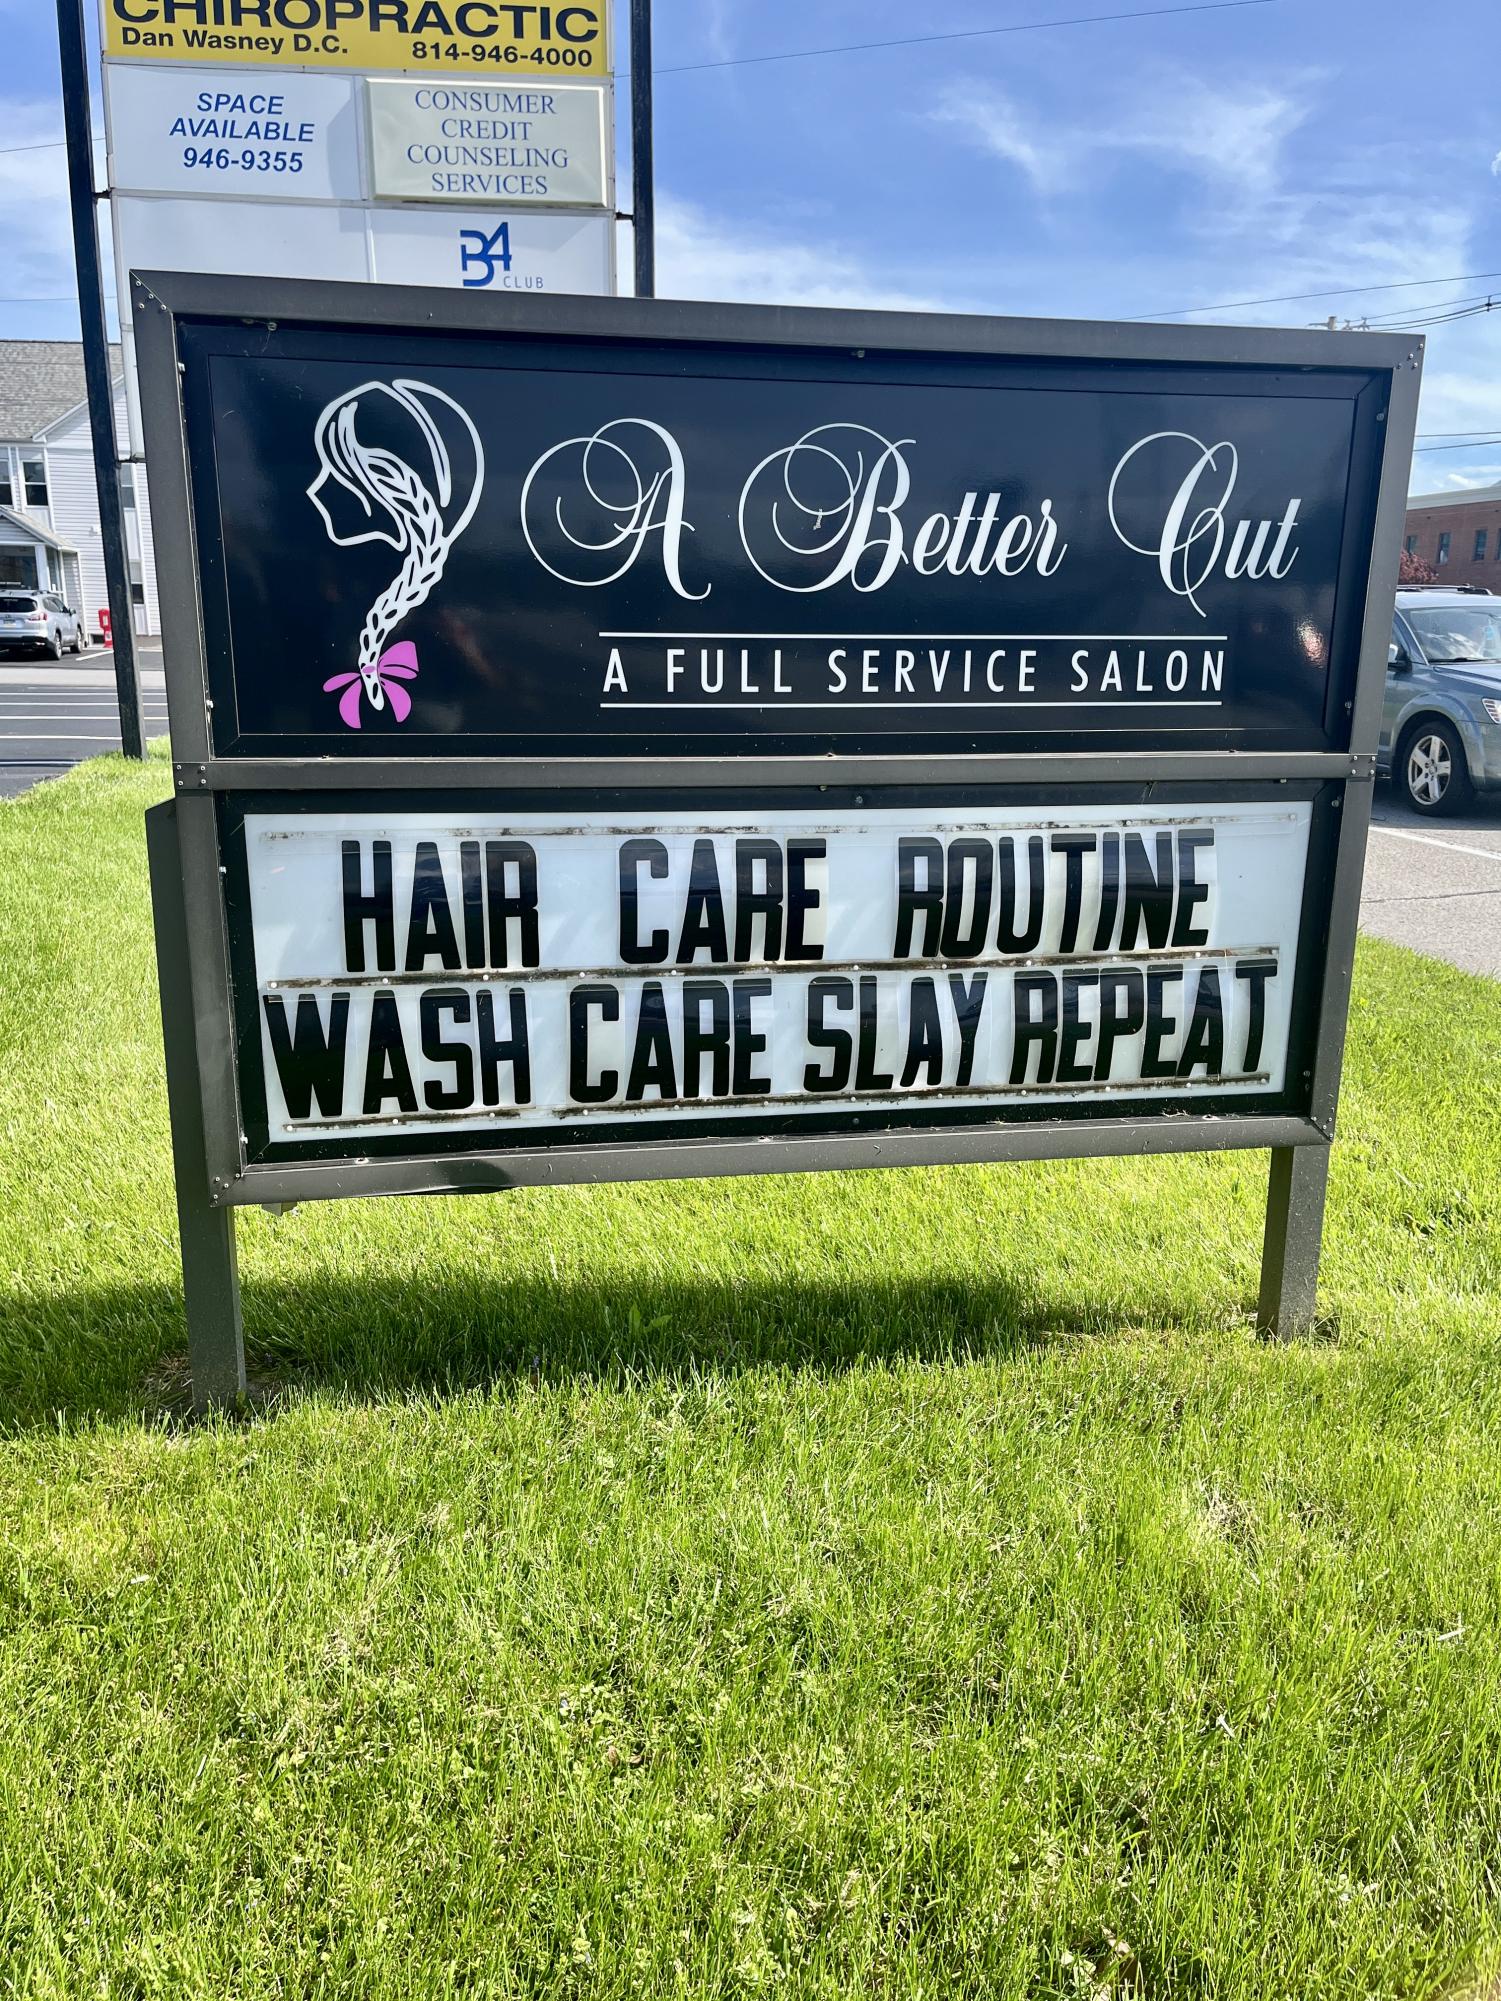 A Better Cut! Located at 913 Logan Blvd., Altoona Pa. At this salon, they preform haircuts, hair coloring, manicures, pedicures and false lashes. The hairstylists are very nice and every time I go, I get the best results. Whatever I ask for they can do, client Alyssa Kephart said. 